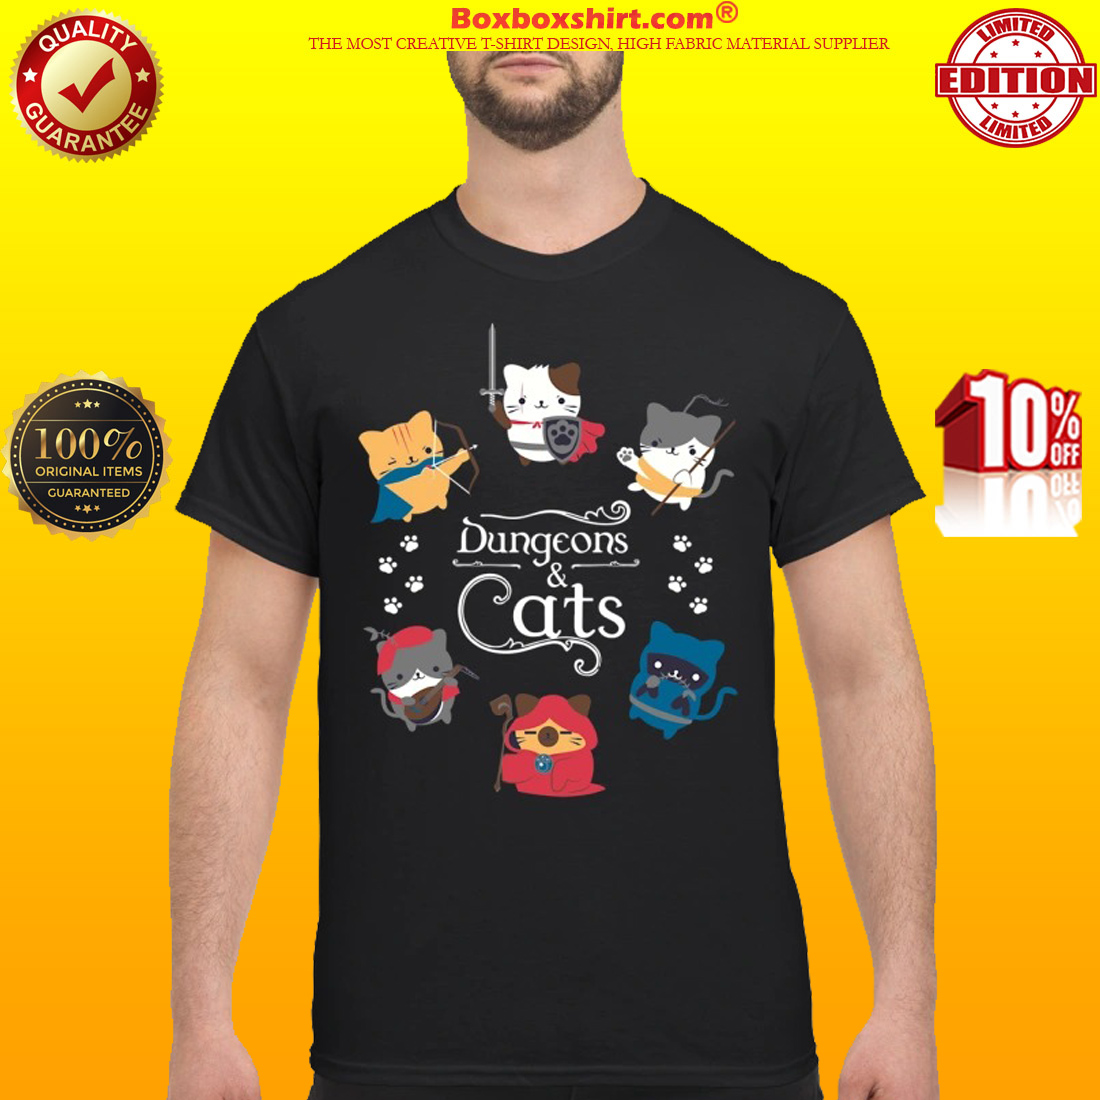 Dungeons and cats classic shirt